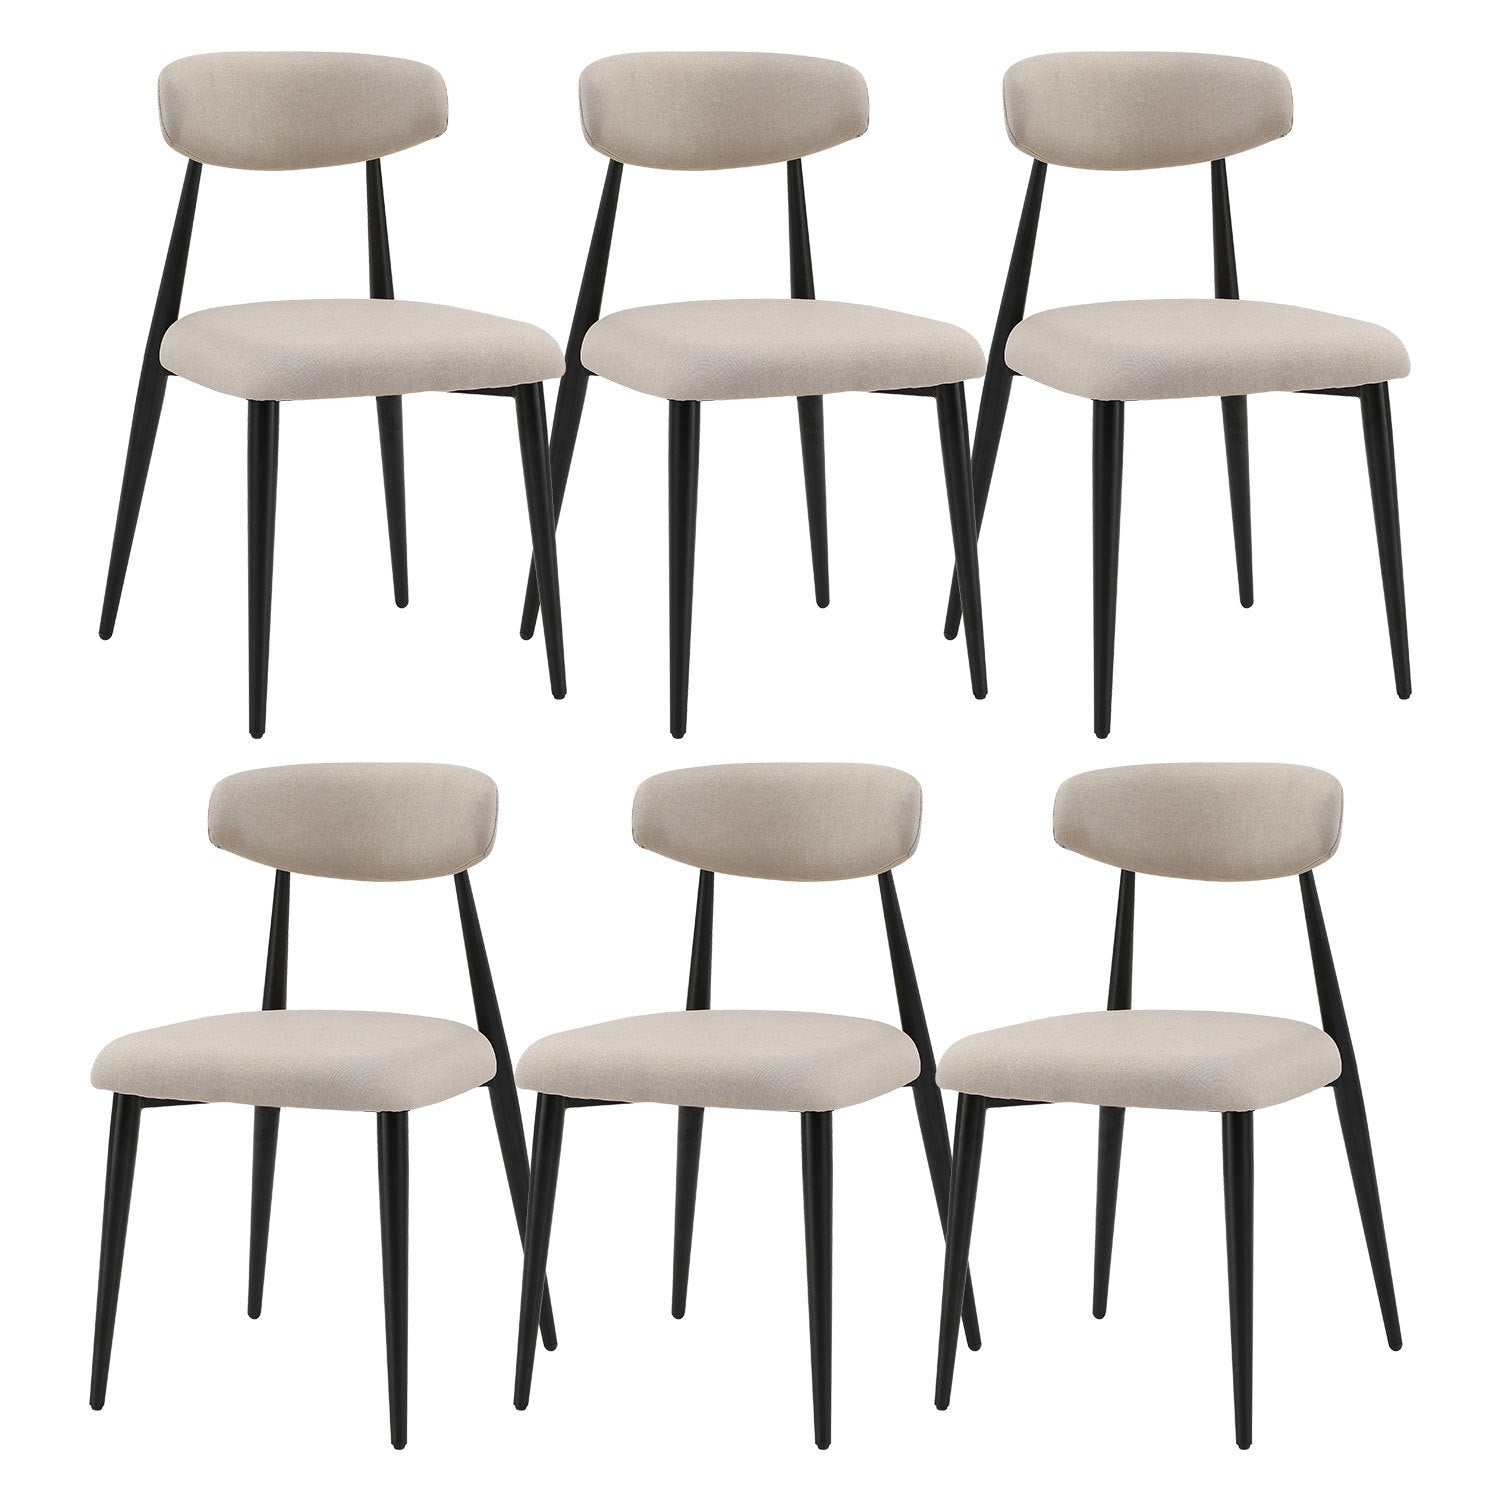 (Set of 6)Dining Chairs , Upholstered Chairs with Metal Legs for Kitchen Dining Room,Light Grey